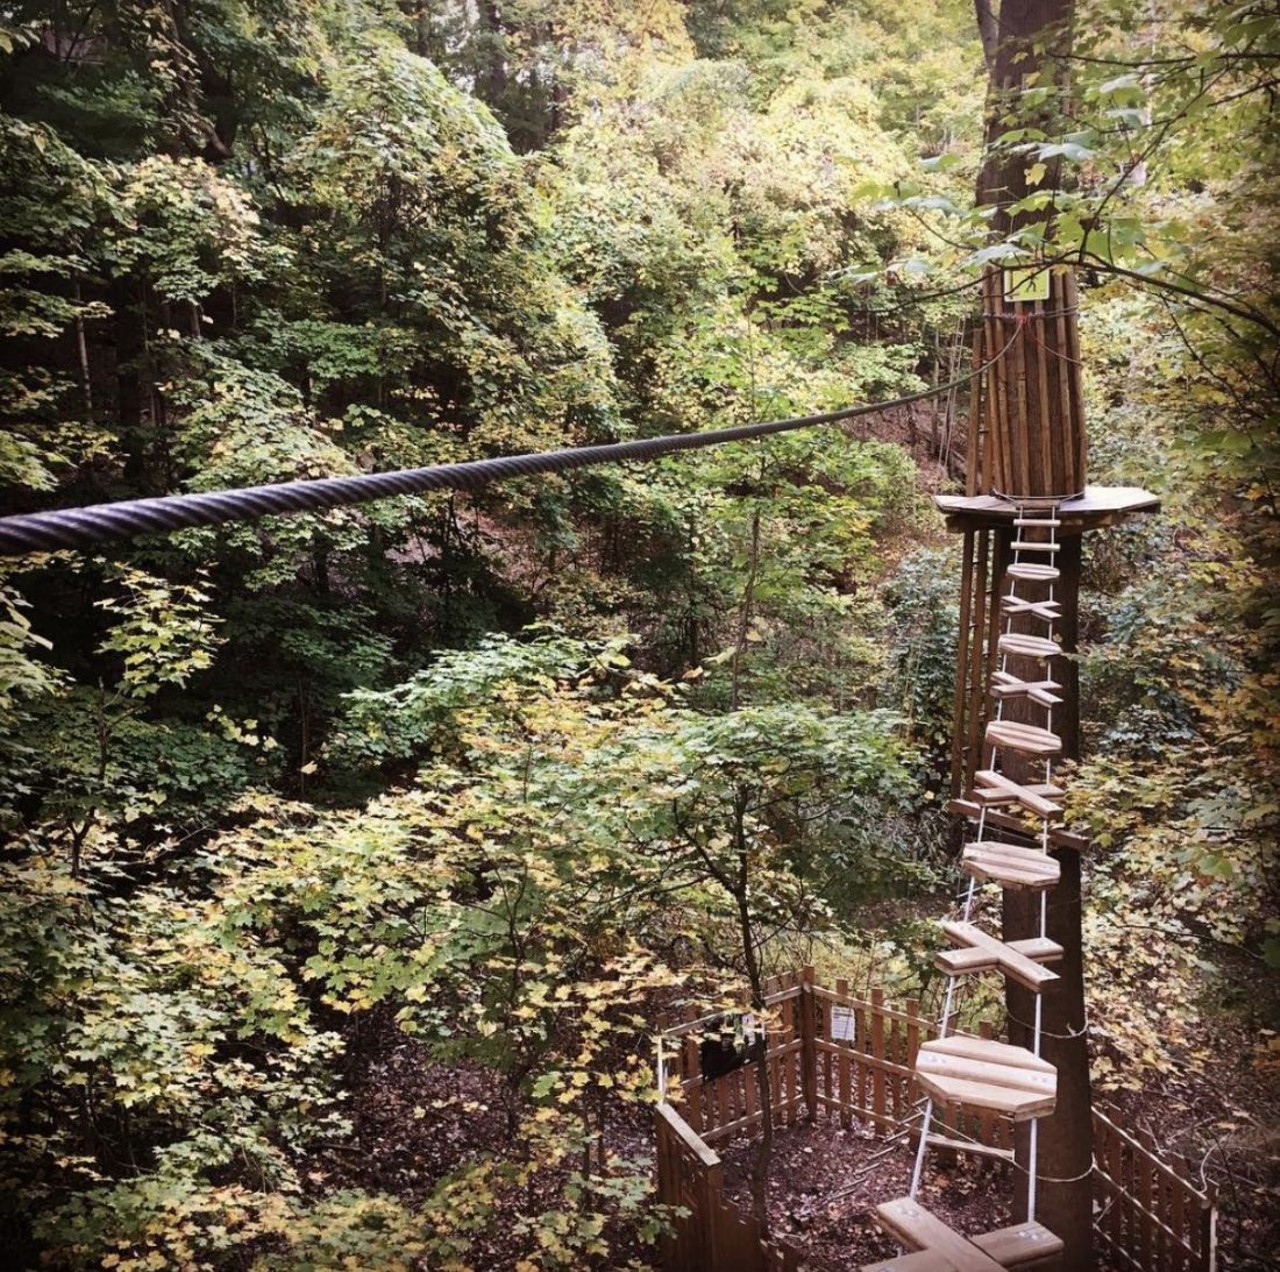  Zip Line and Ropes Course at the Metroparks
16200 Valley Pkwy., Strongsville
Head to the Mill Stream Run Reservation in Strongsville for ziplining and a ropes course. The Metroparks has teamed up with ziplining company Go Ape to give you beautiful views of the parks from above.
Photo via @GoApeCleveland/Instagram